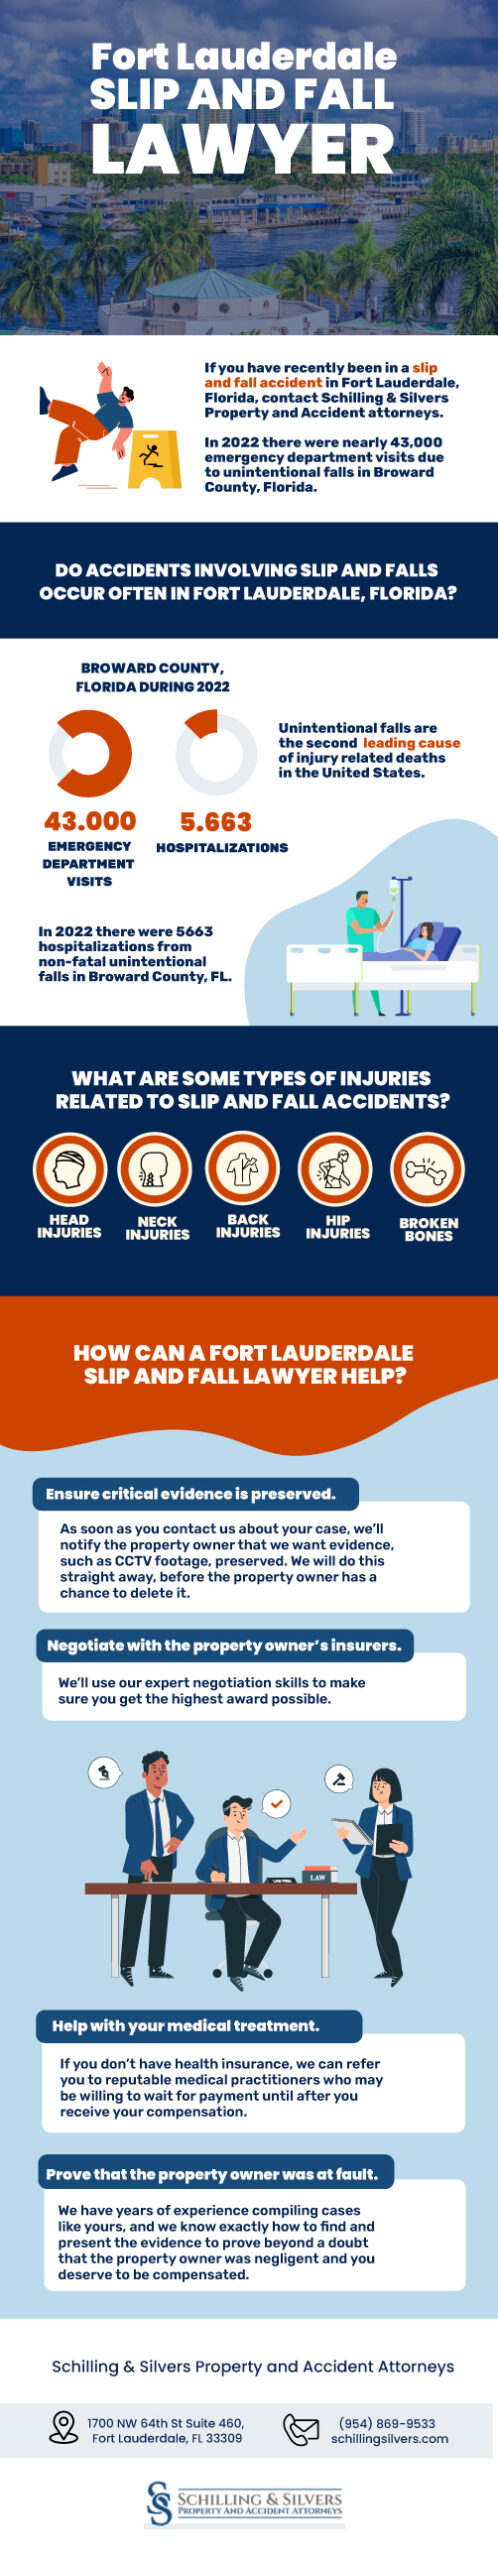 slip and fall infographic fort lauderdale florida